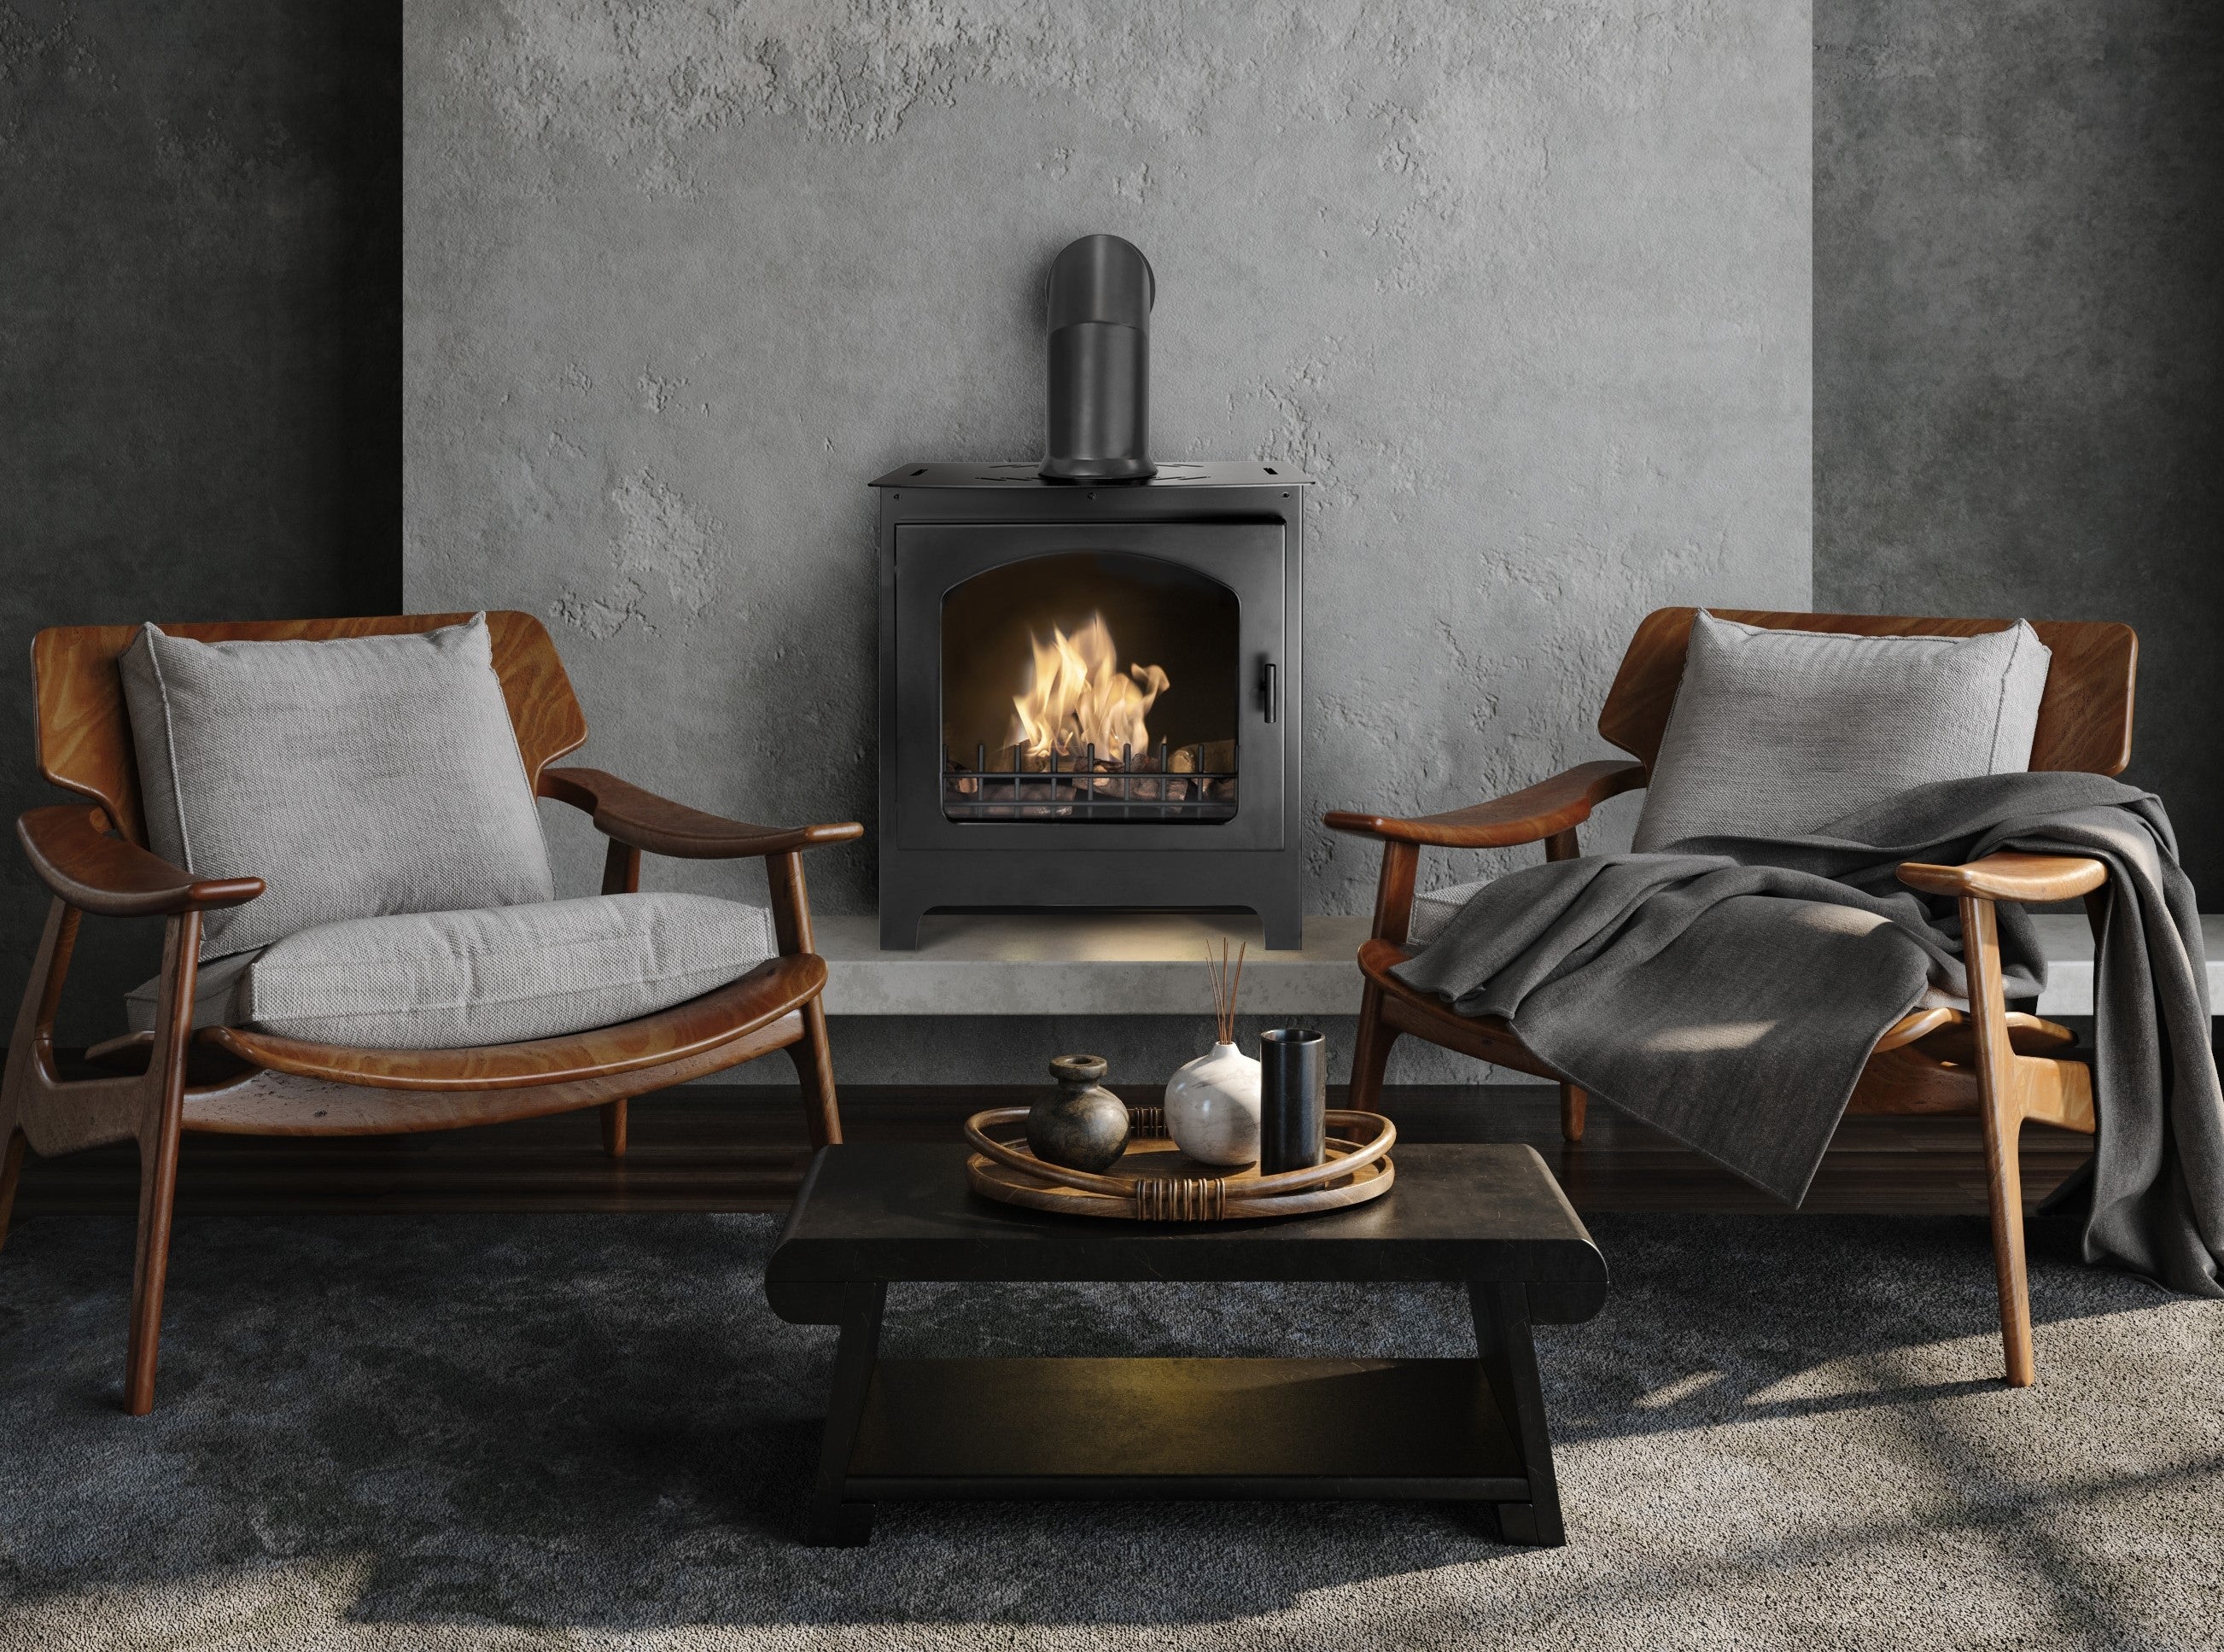 MULBERRY Black Bioethanol Stove in living room